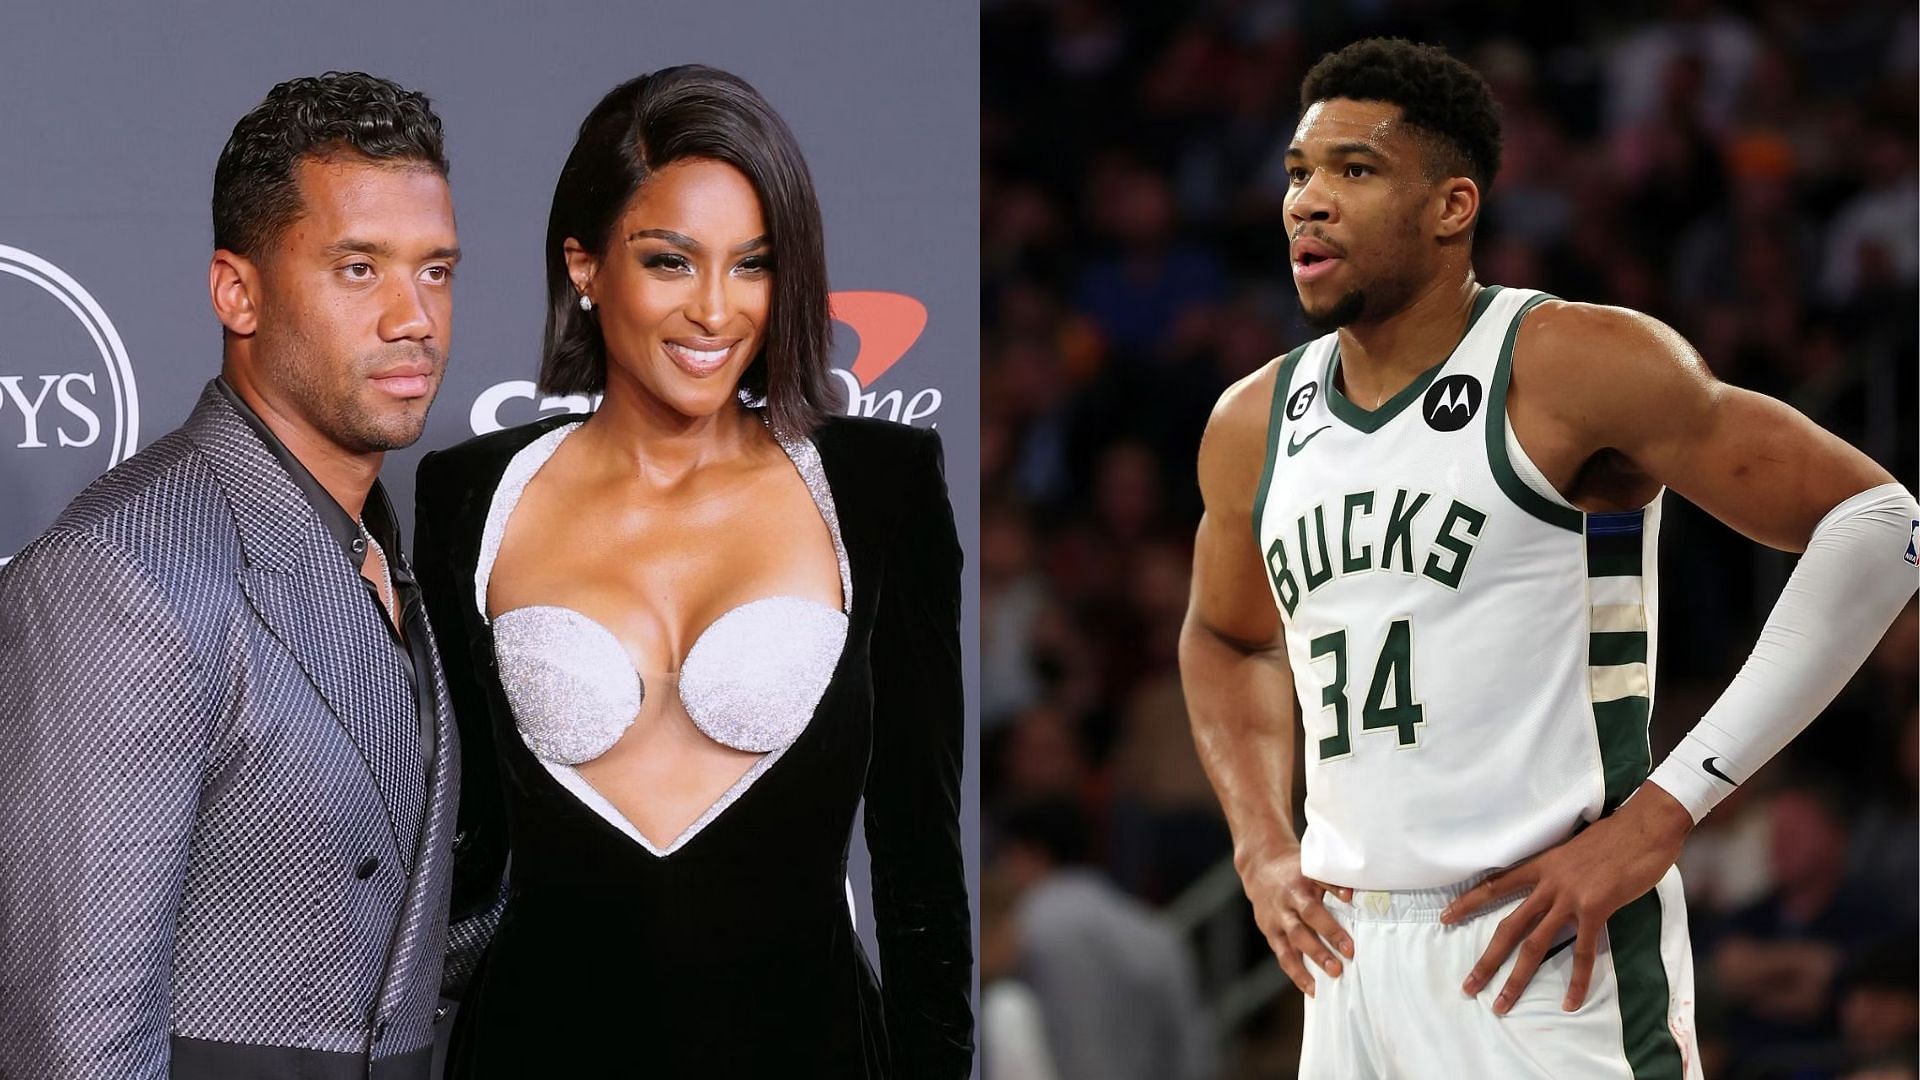 Russell Wilson supports Giannis